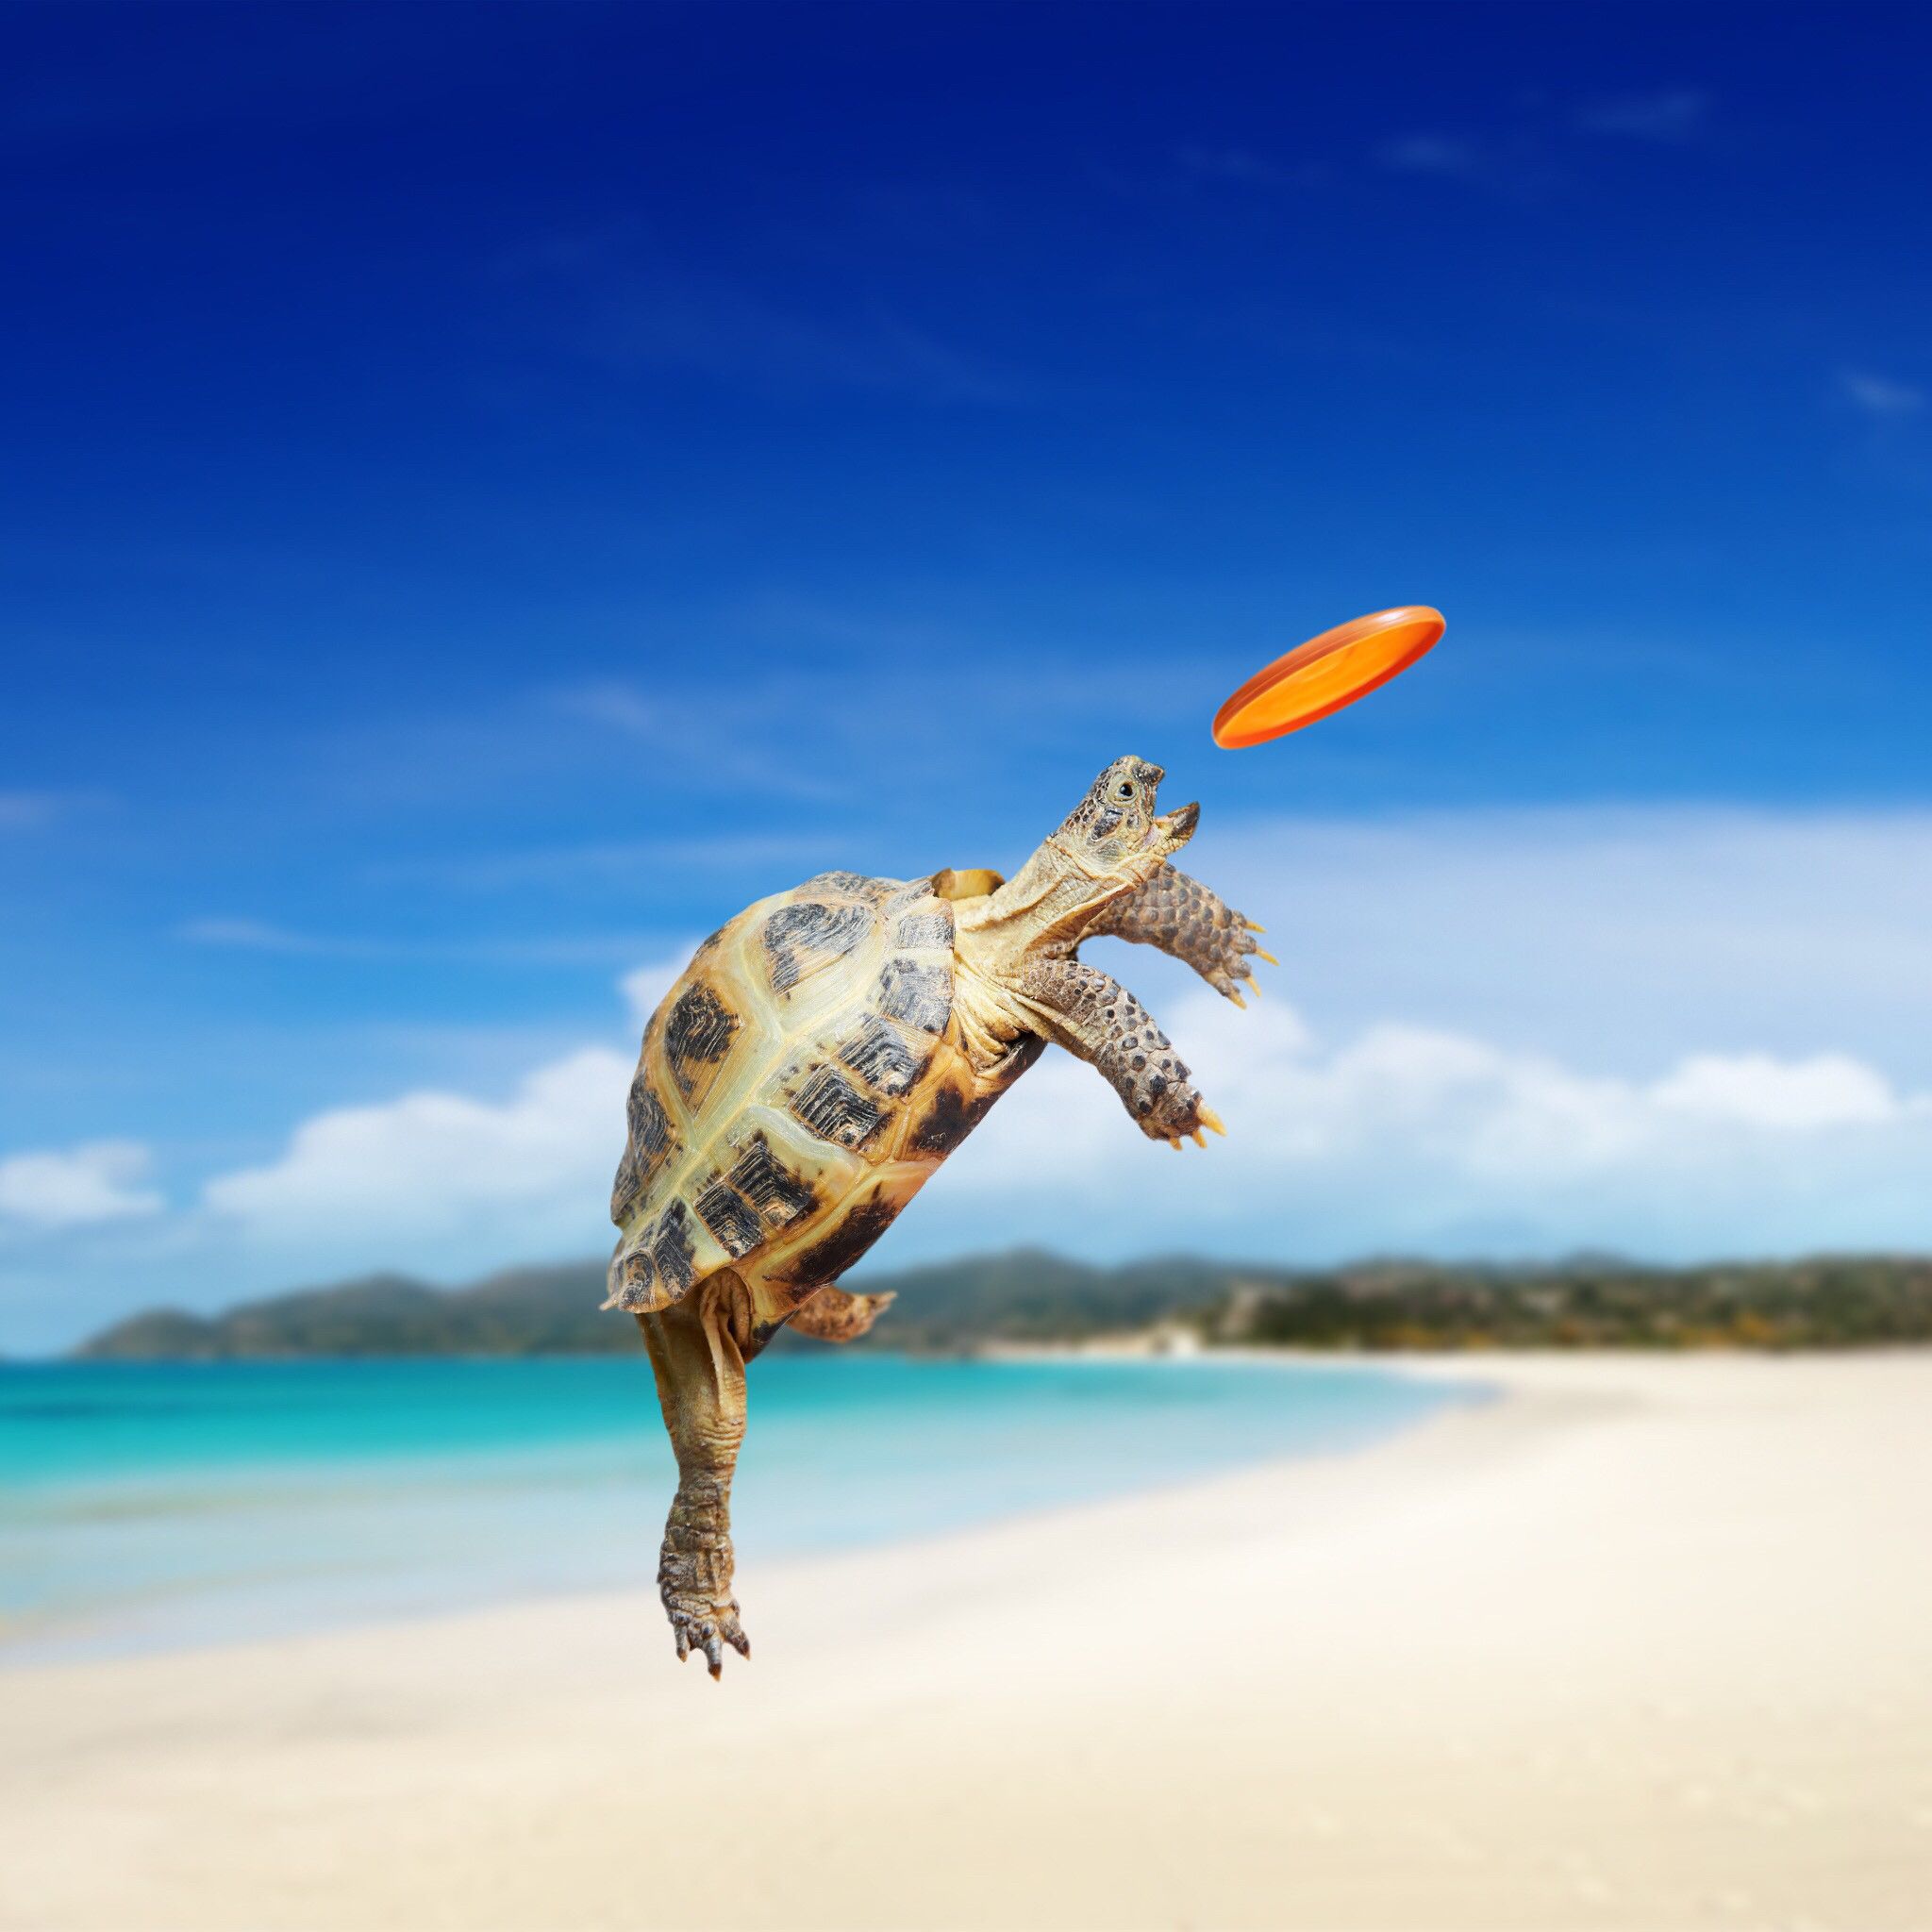 A turtle jumping to catch an orange frisbee - Sea turtle